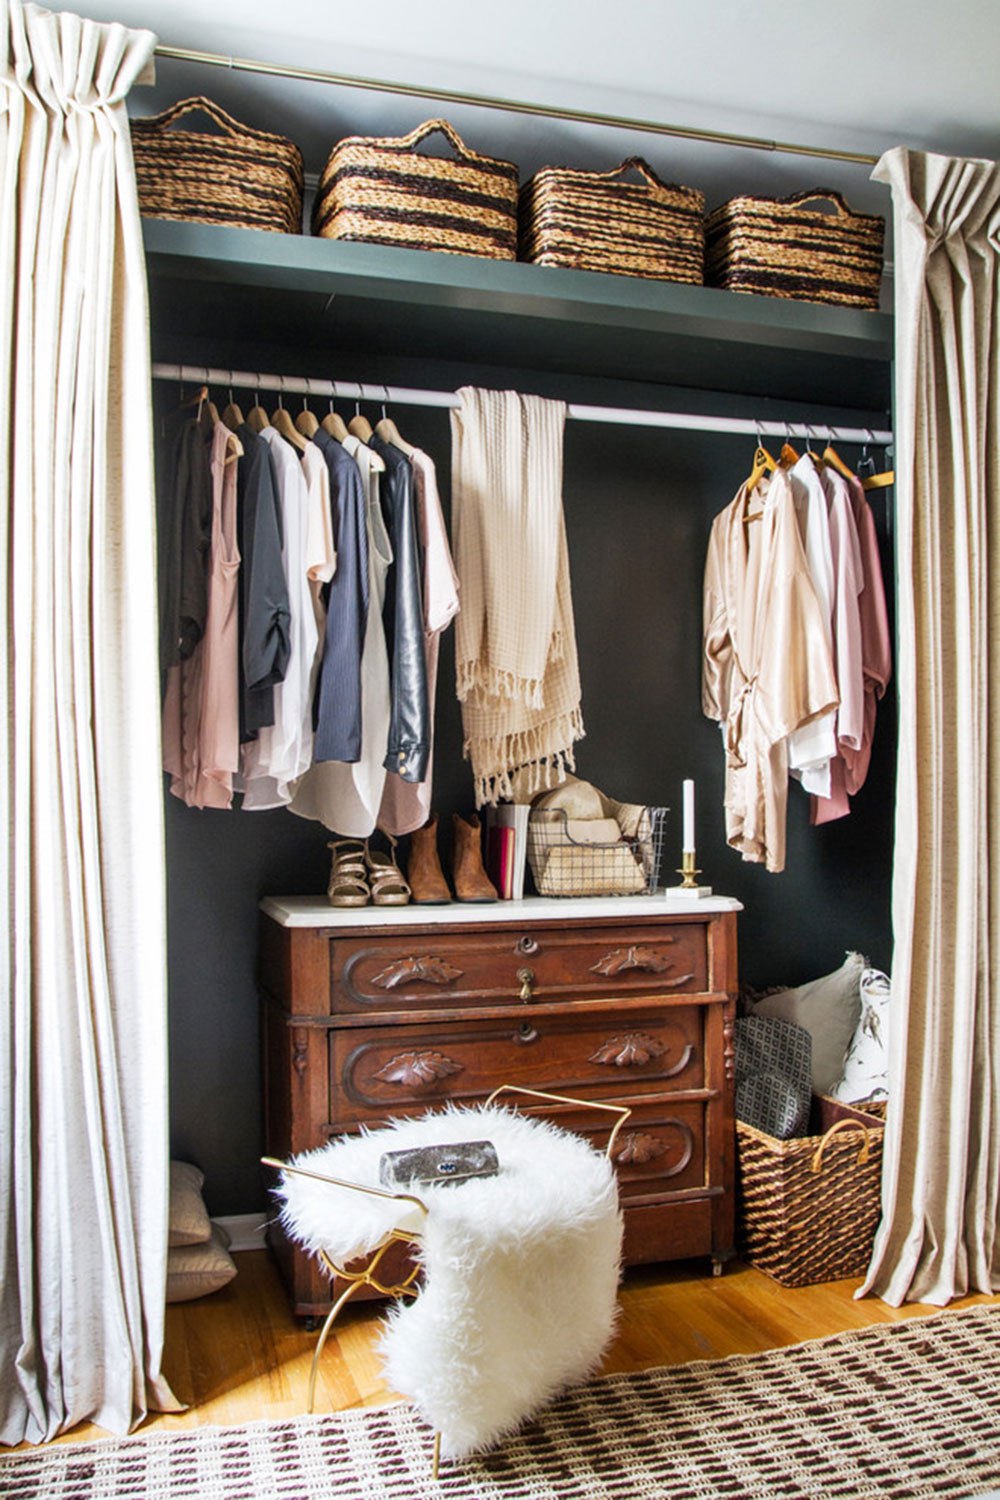 EM-Interiors-Chicago-One-Room-Challenge-2015-by-Kelly-Peloza-Photo-LLC How to cover a closet without doors (Inexpensive options)